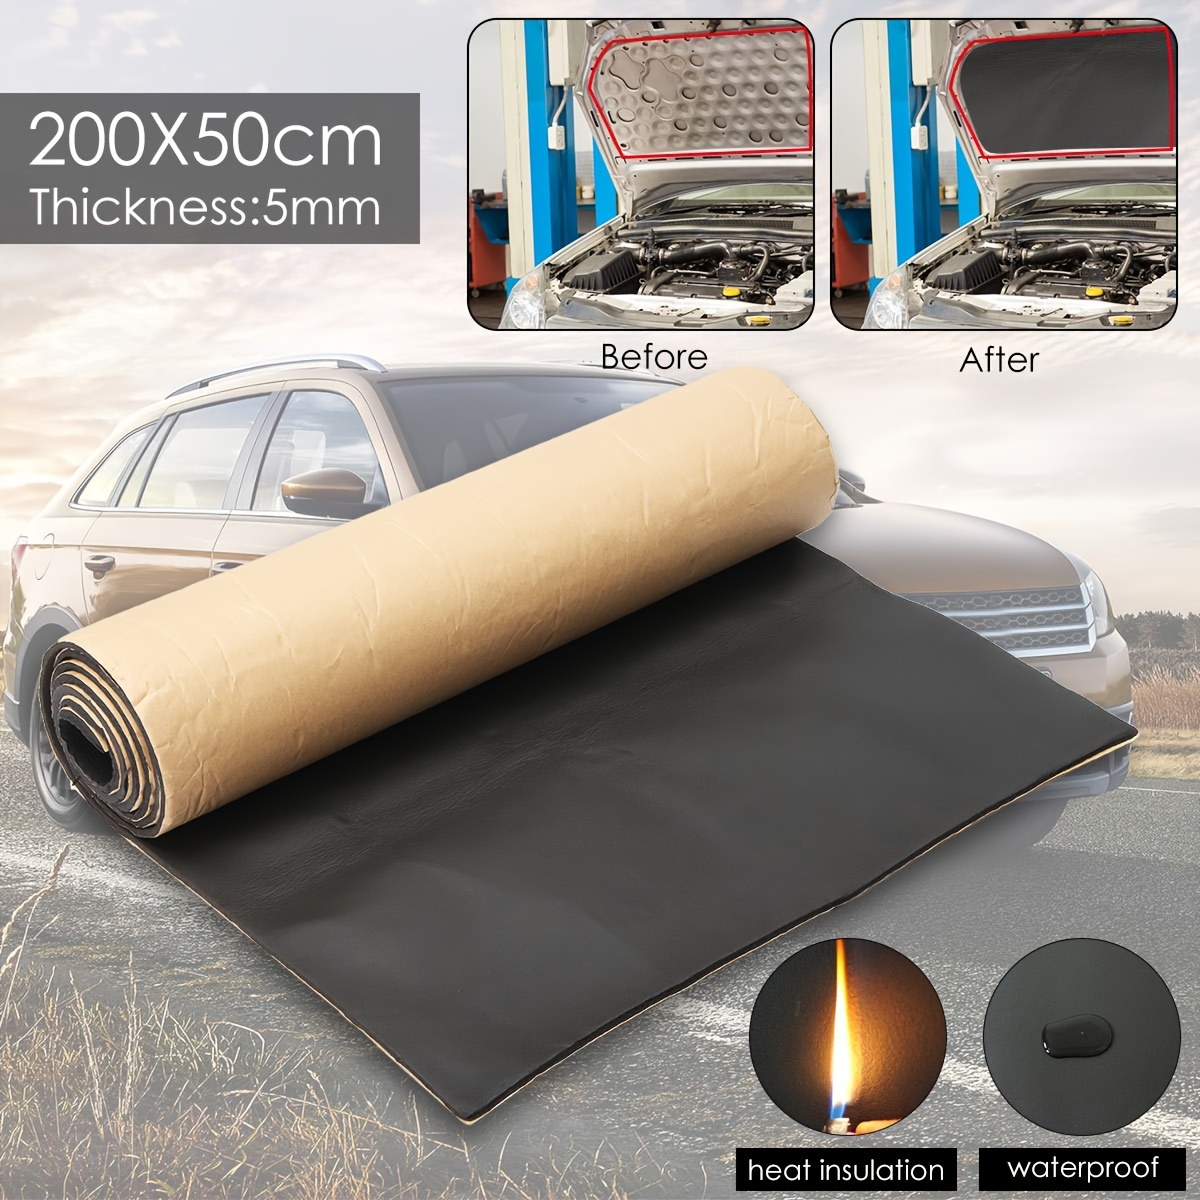 

200x50cm 5mm Heat Insulation Cotton Car Sound Proofing Material Deadening Anti-noise Sound Insulation Cotton Heat Closed Cell Foam